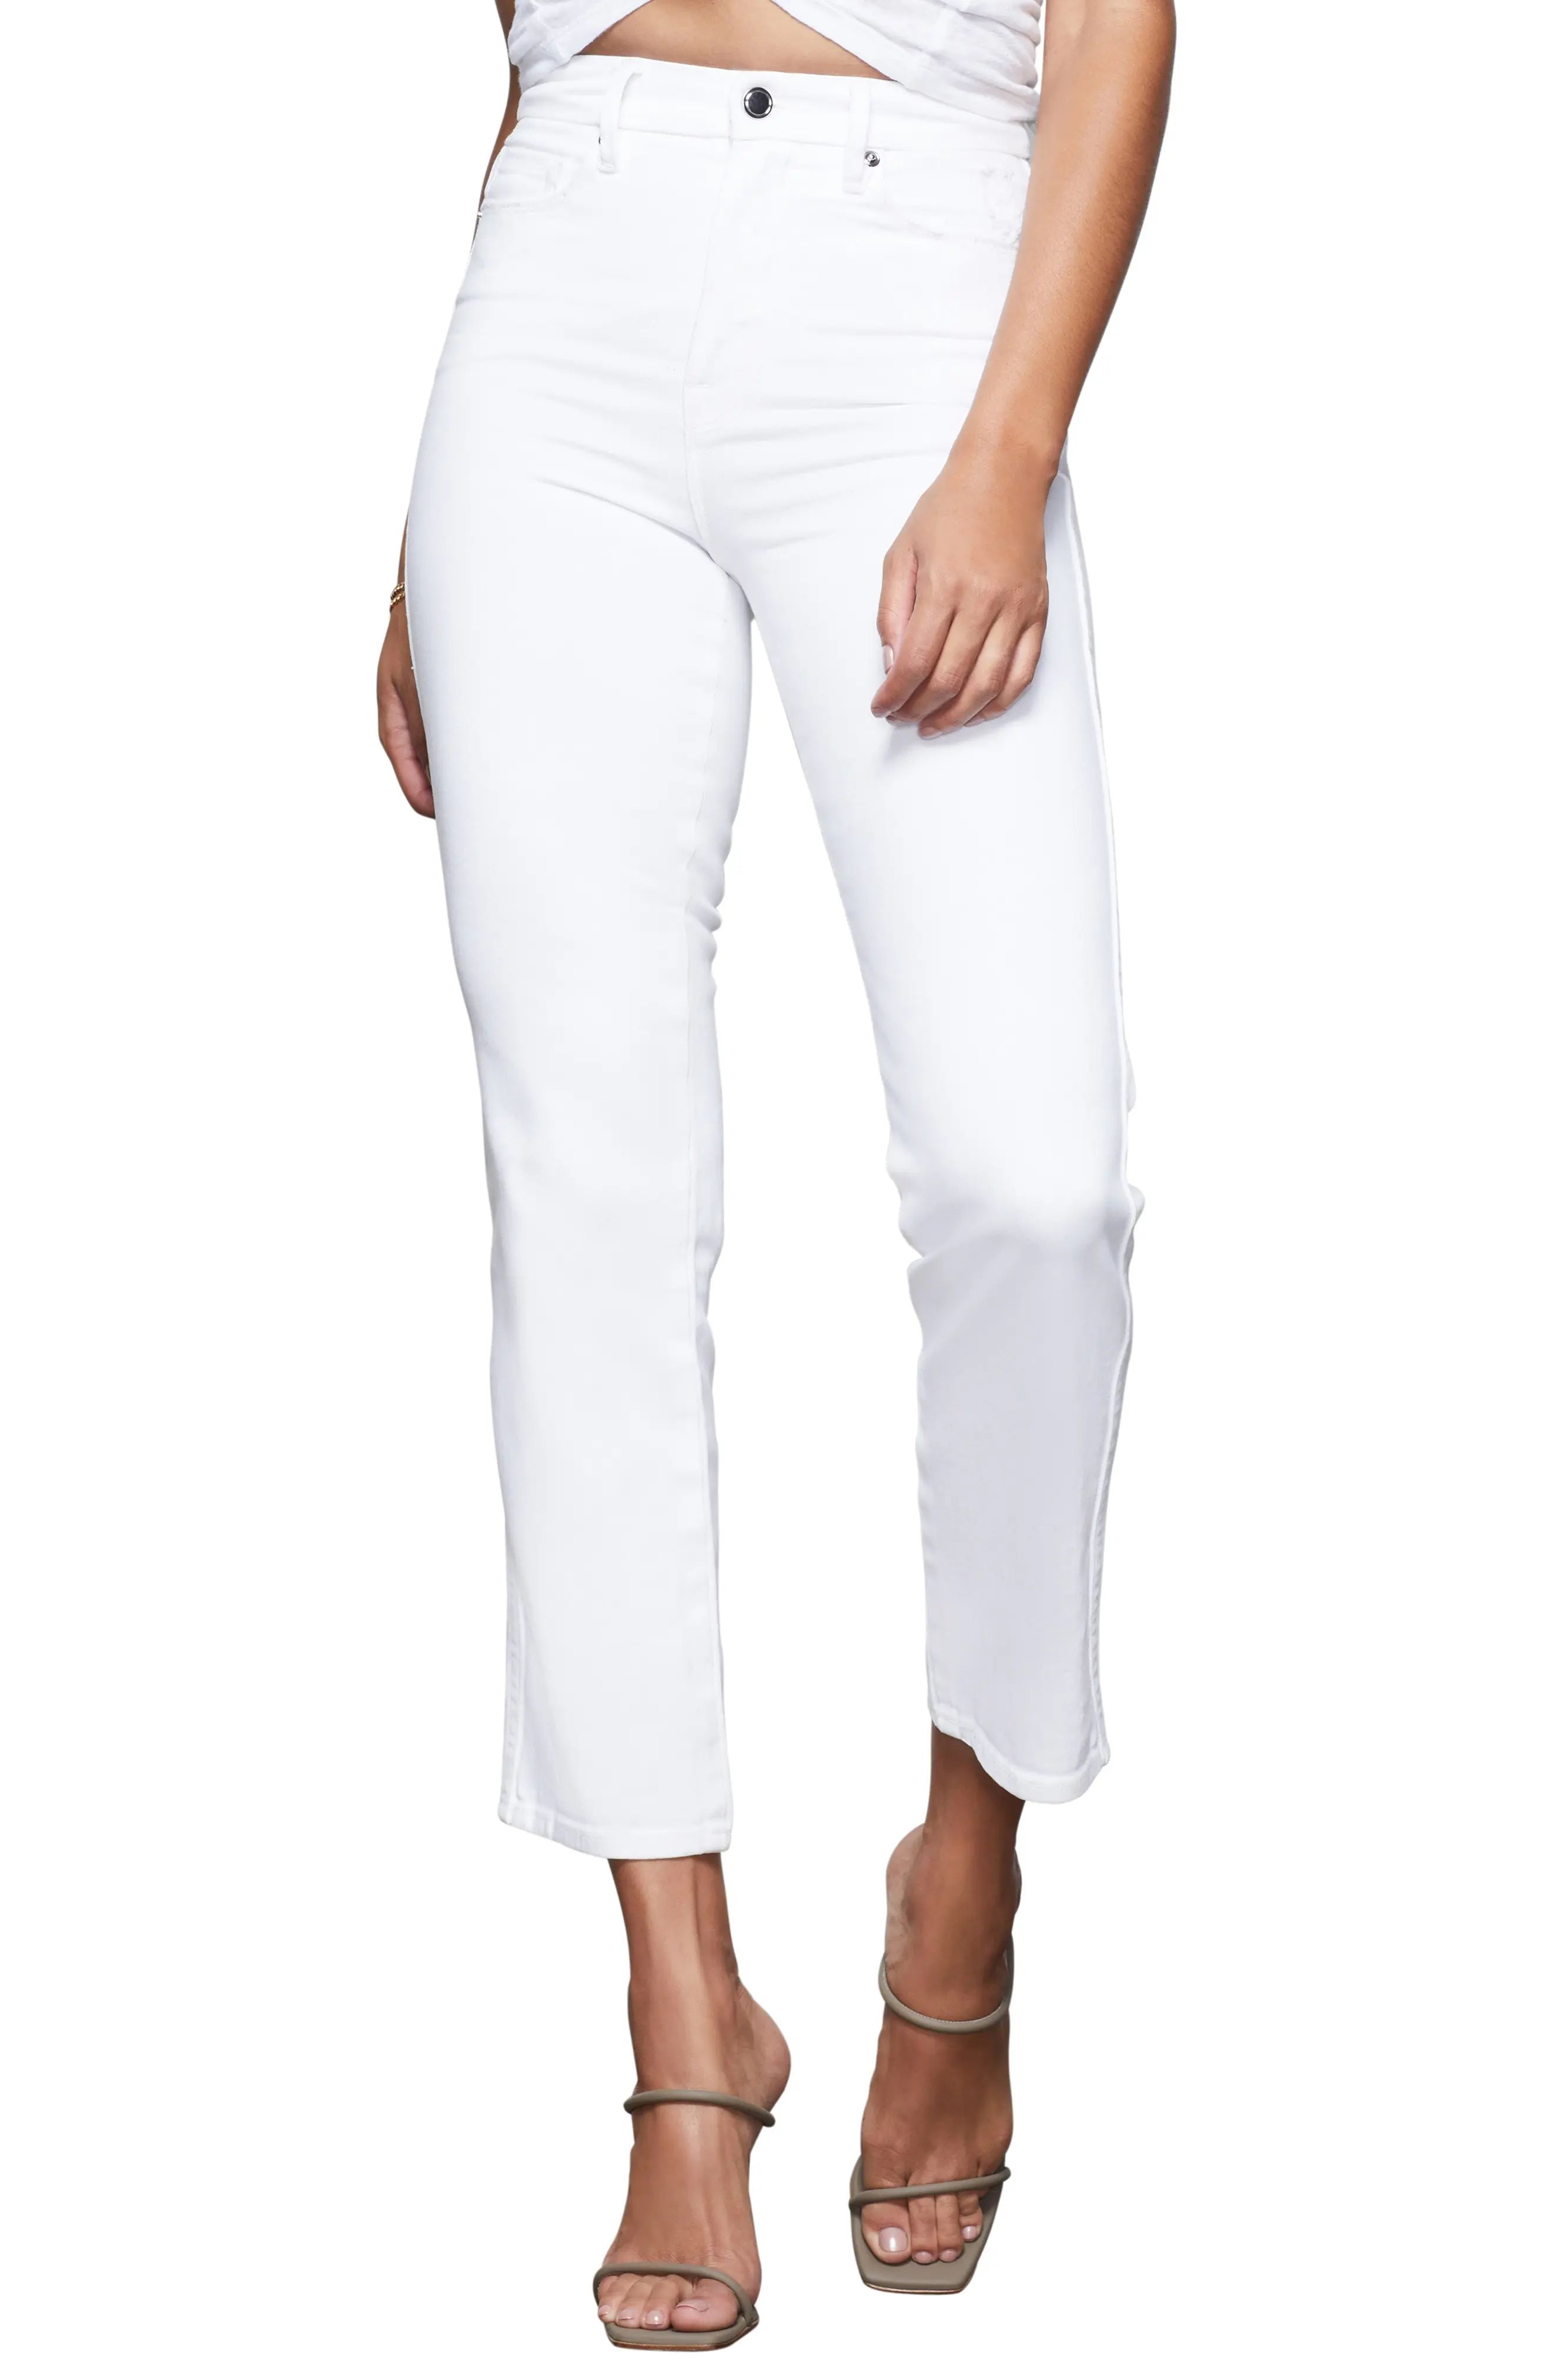 Plus Size Women's Good American Good Curve Straight Jeans, Size 20 - White | Nordstrom